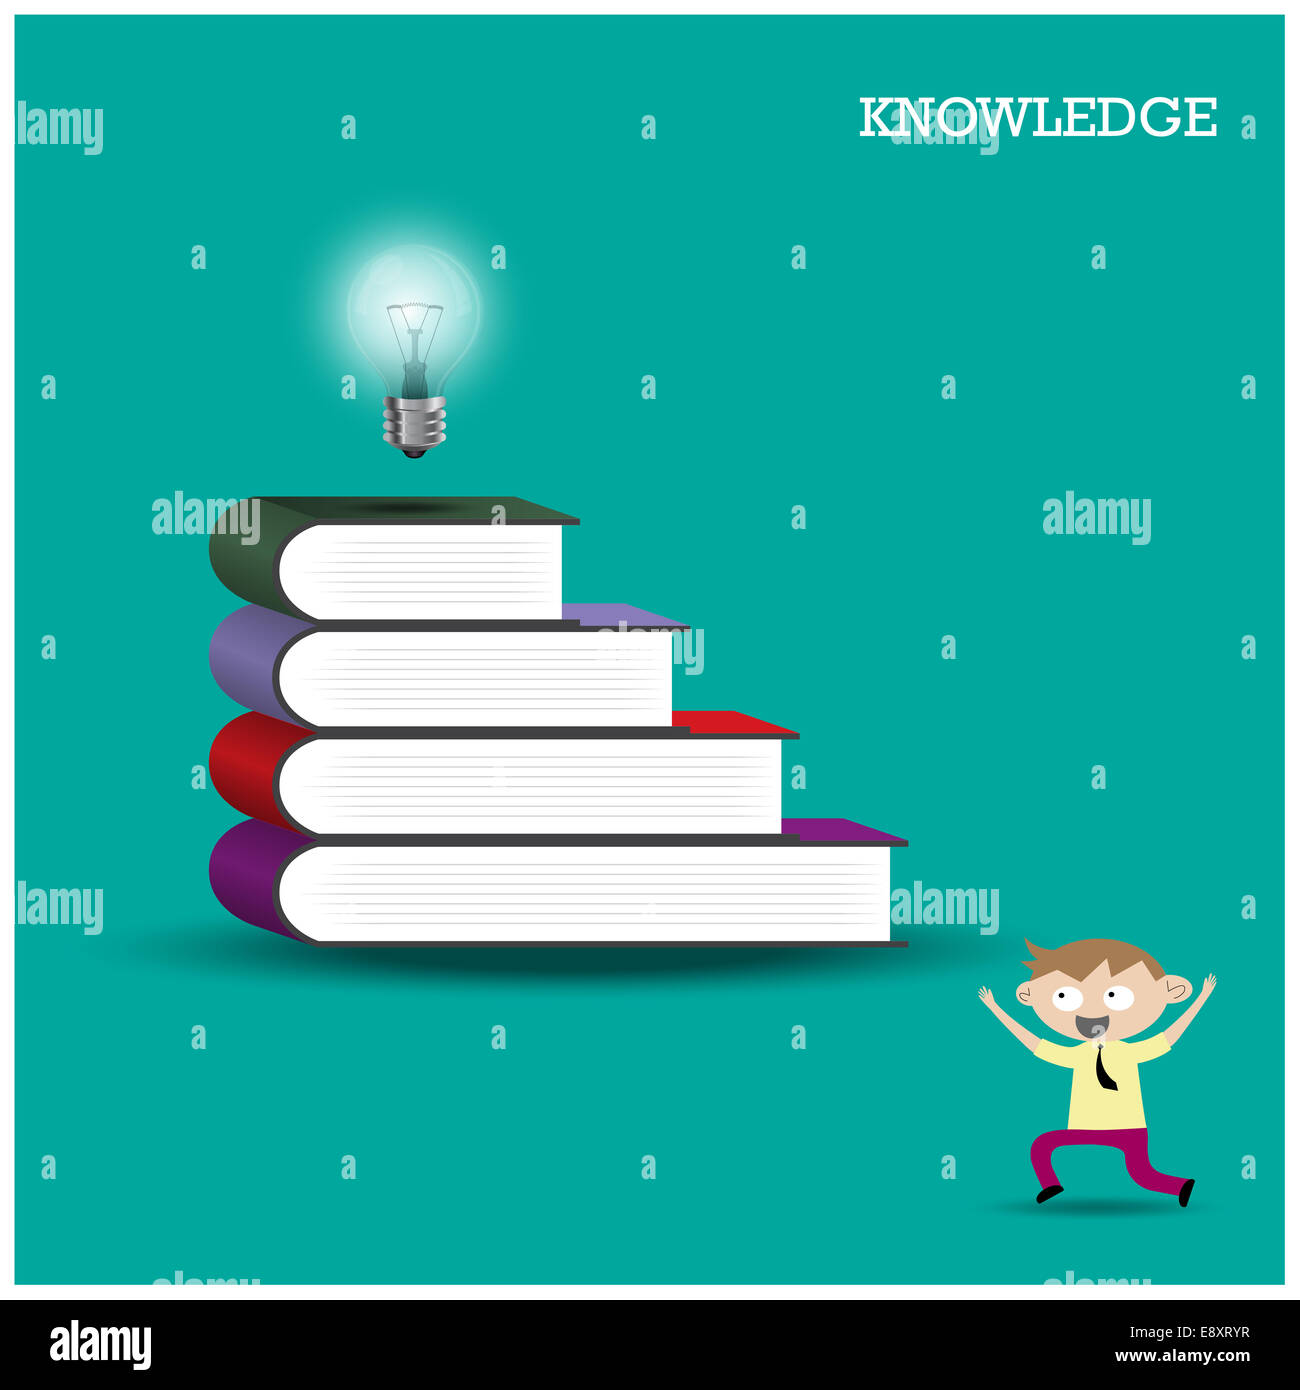 Knowledge and learning concept. Stock Photo